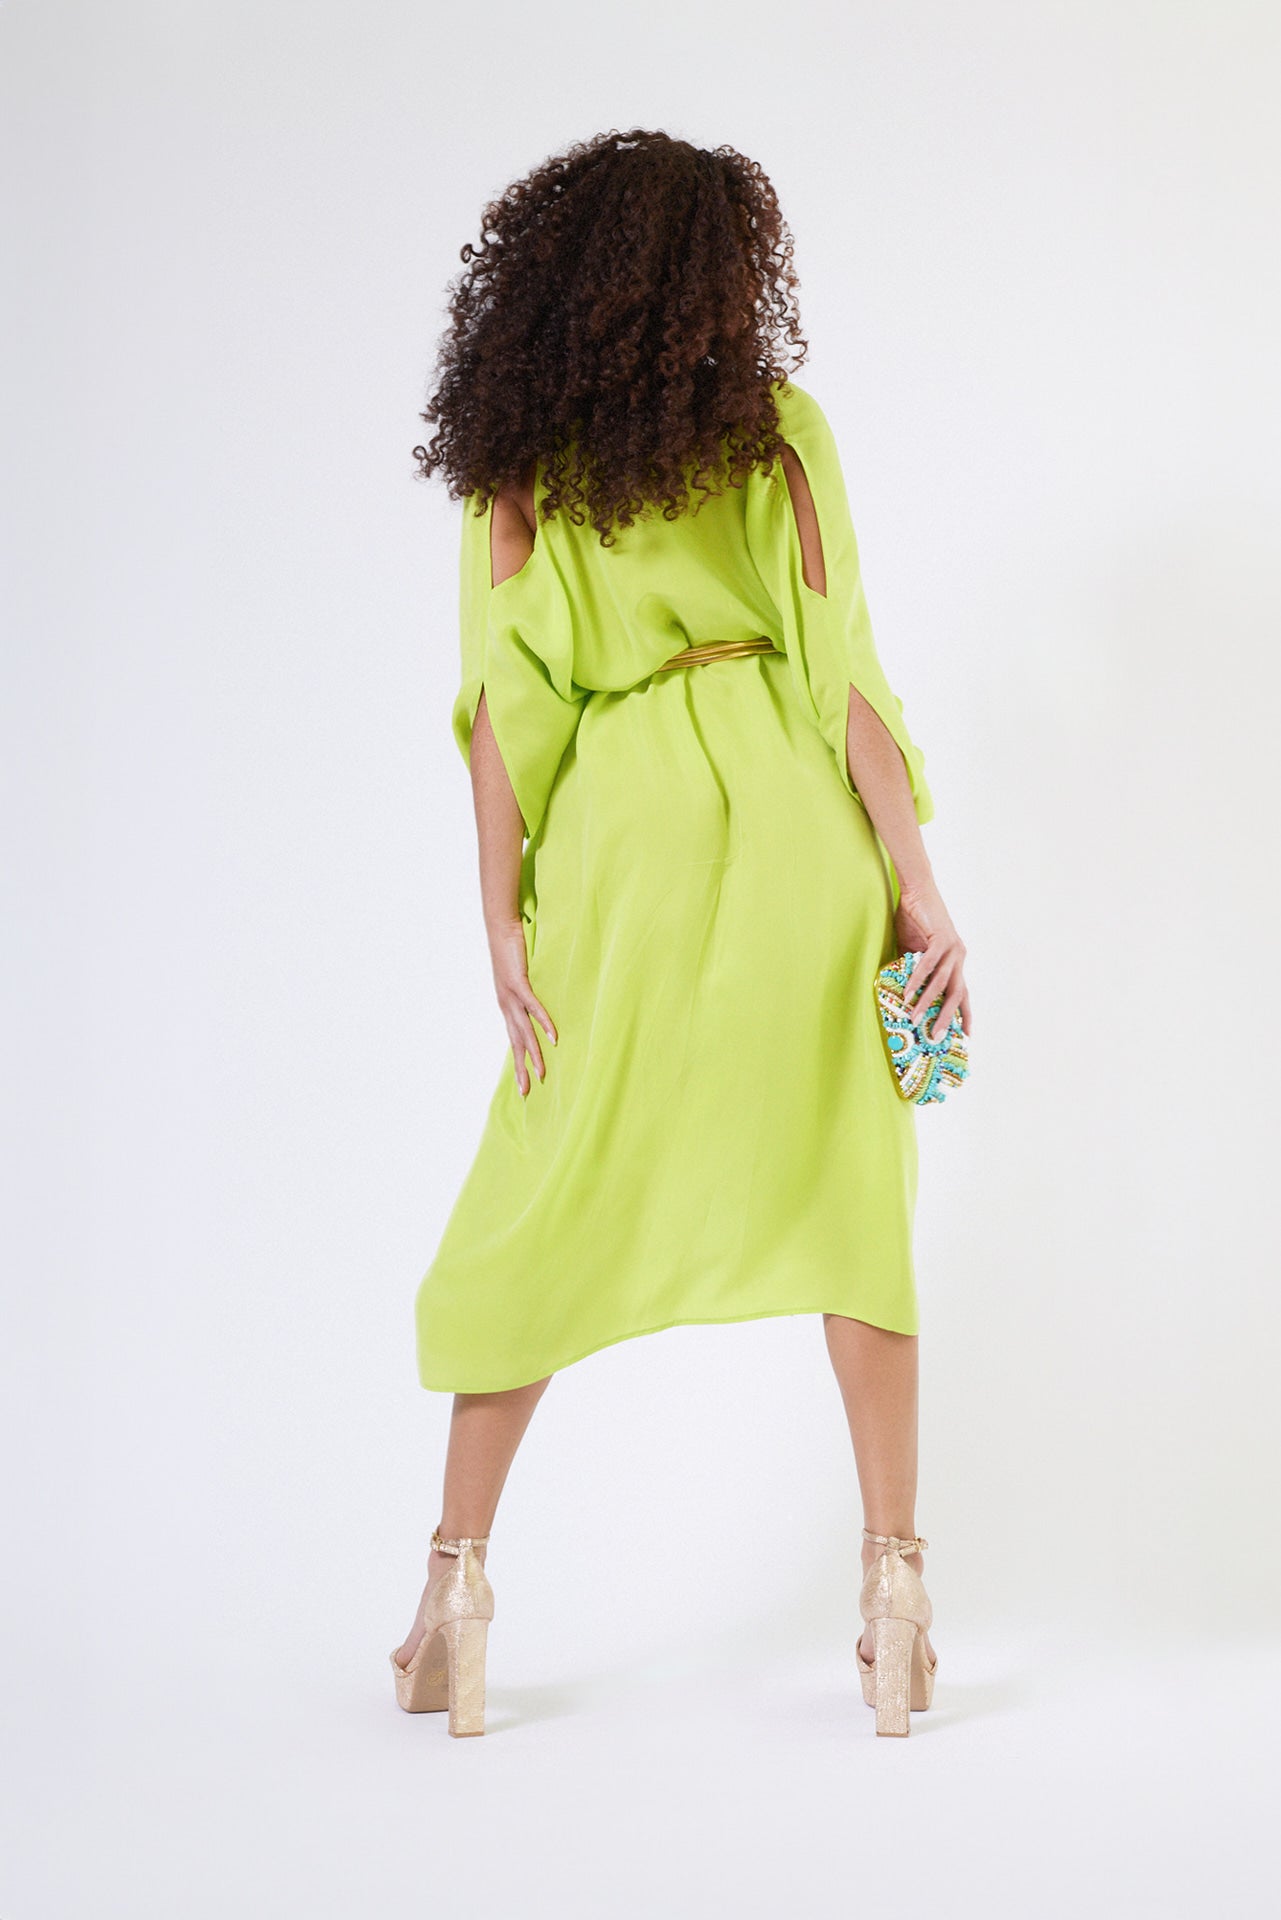 back view of woman wearing bright yellow kaftan duster with front zipper made from recycled materials 3